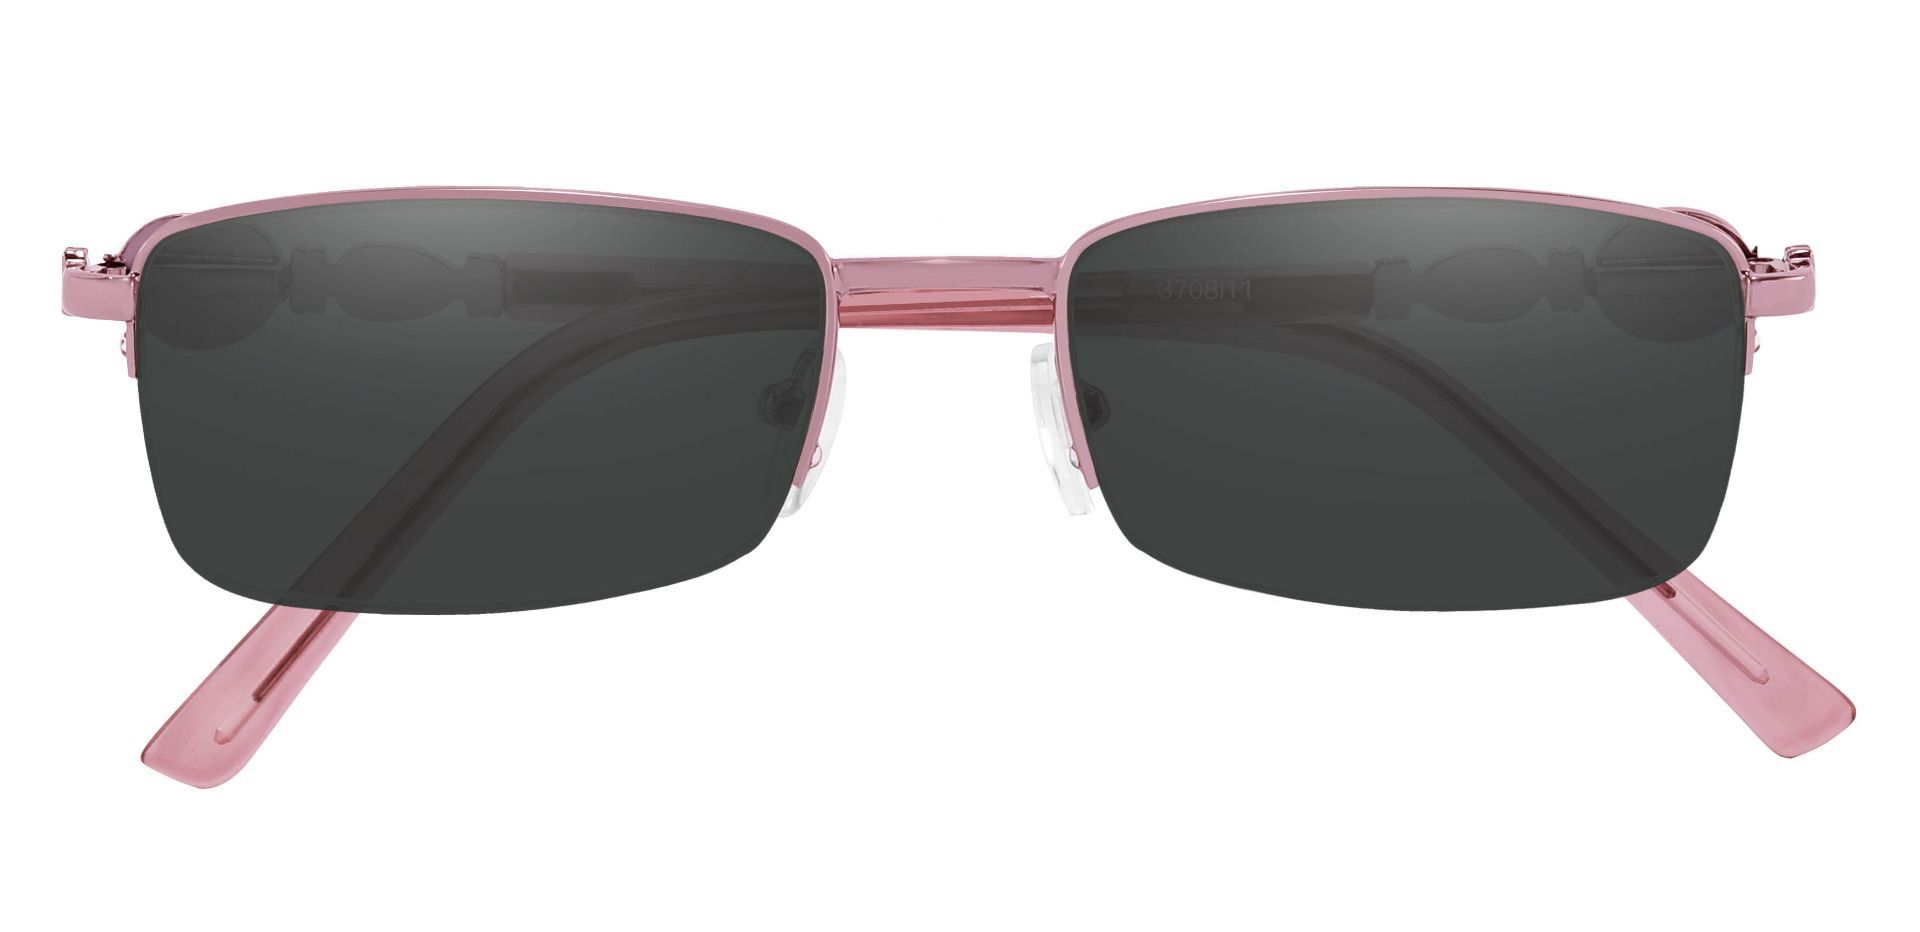 Crowley Rectangle Progressive Sunglasses - Pink Frame With Gray Lenses